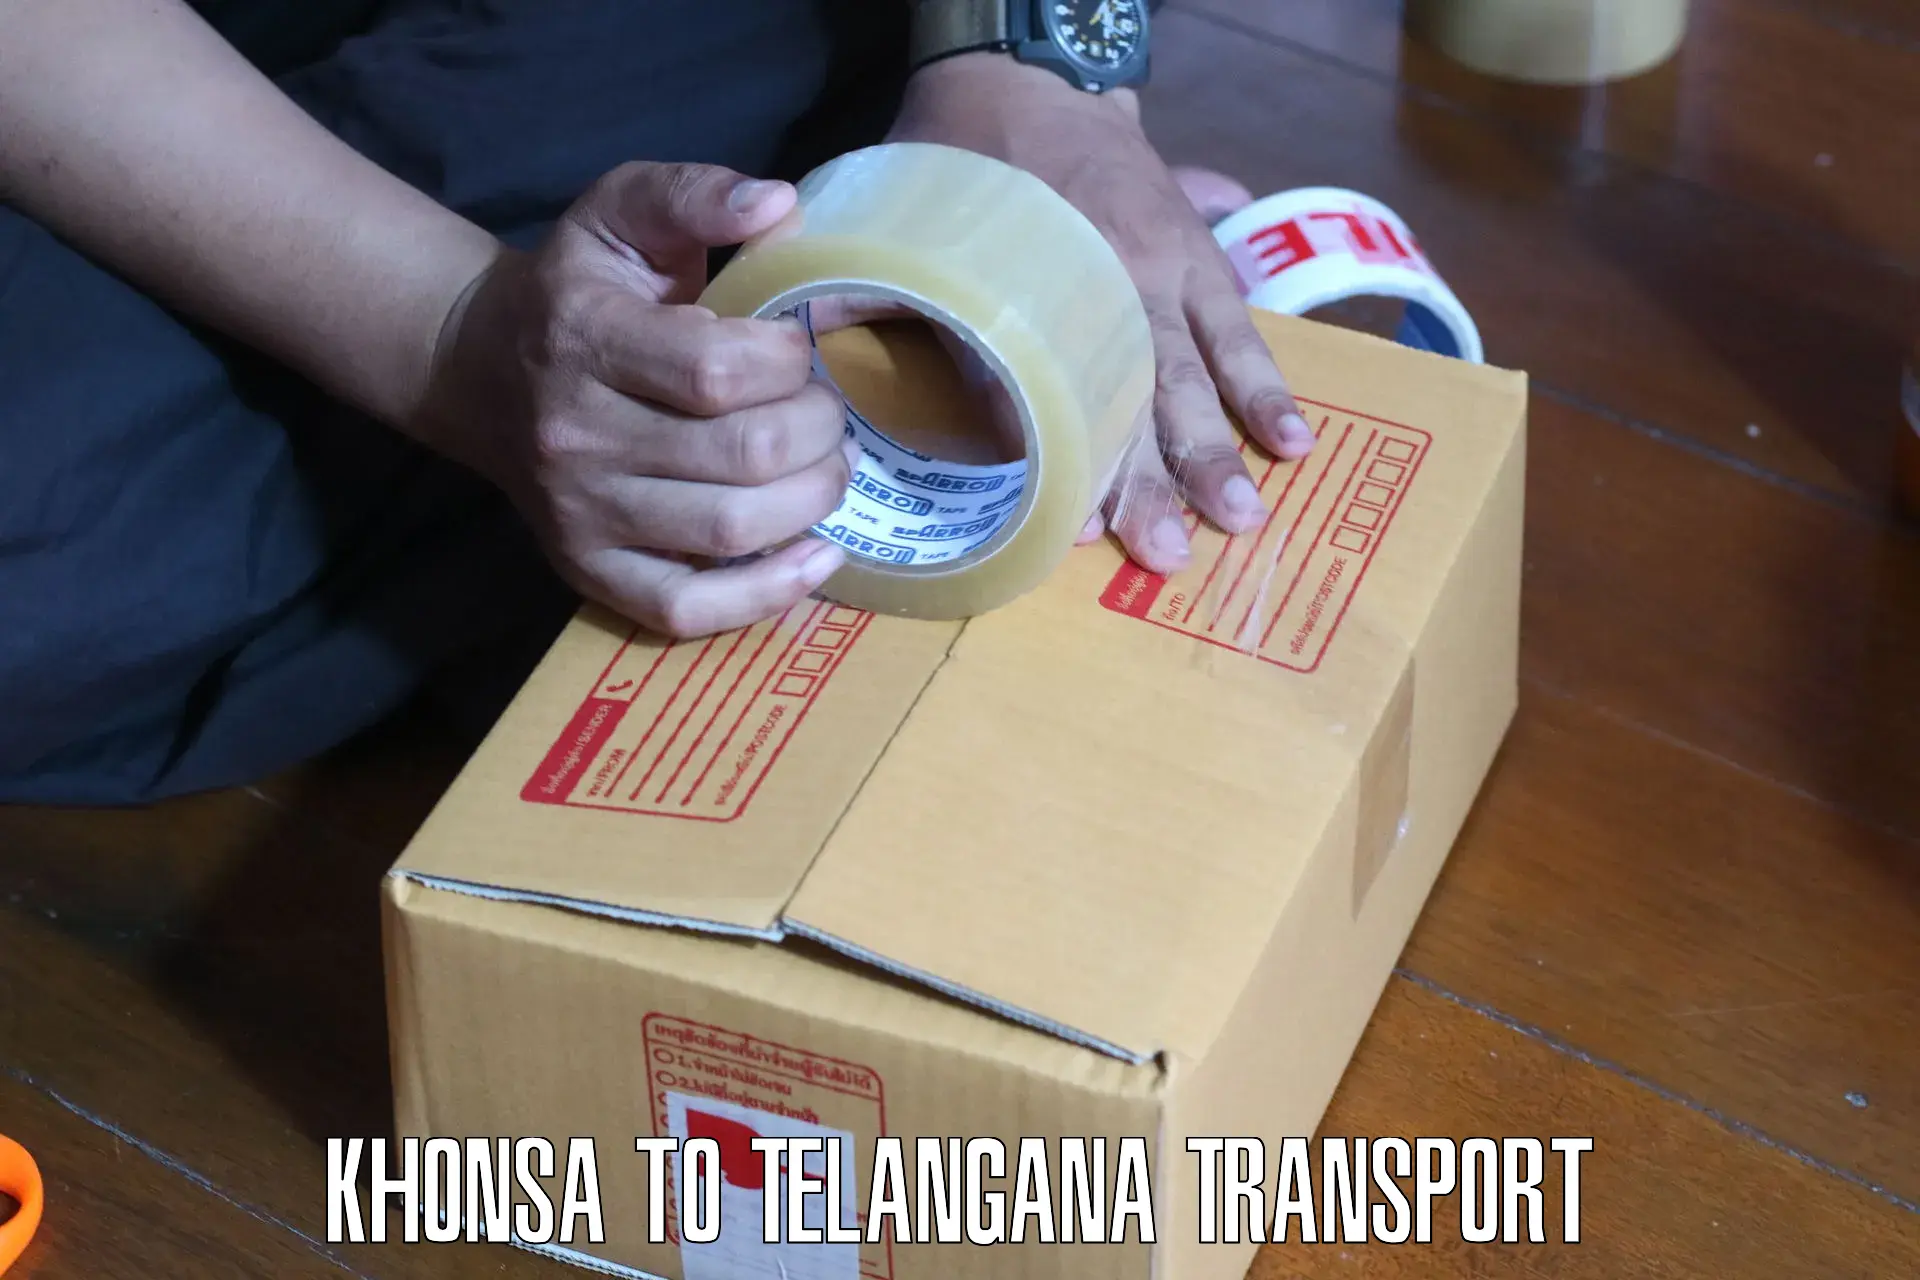 Truck transport companies in India Khonsa to Manneguda